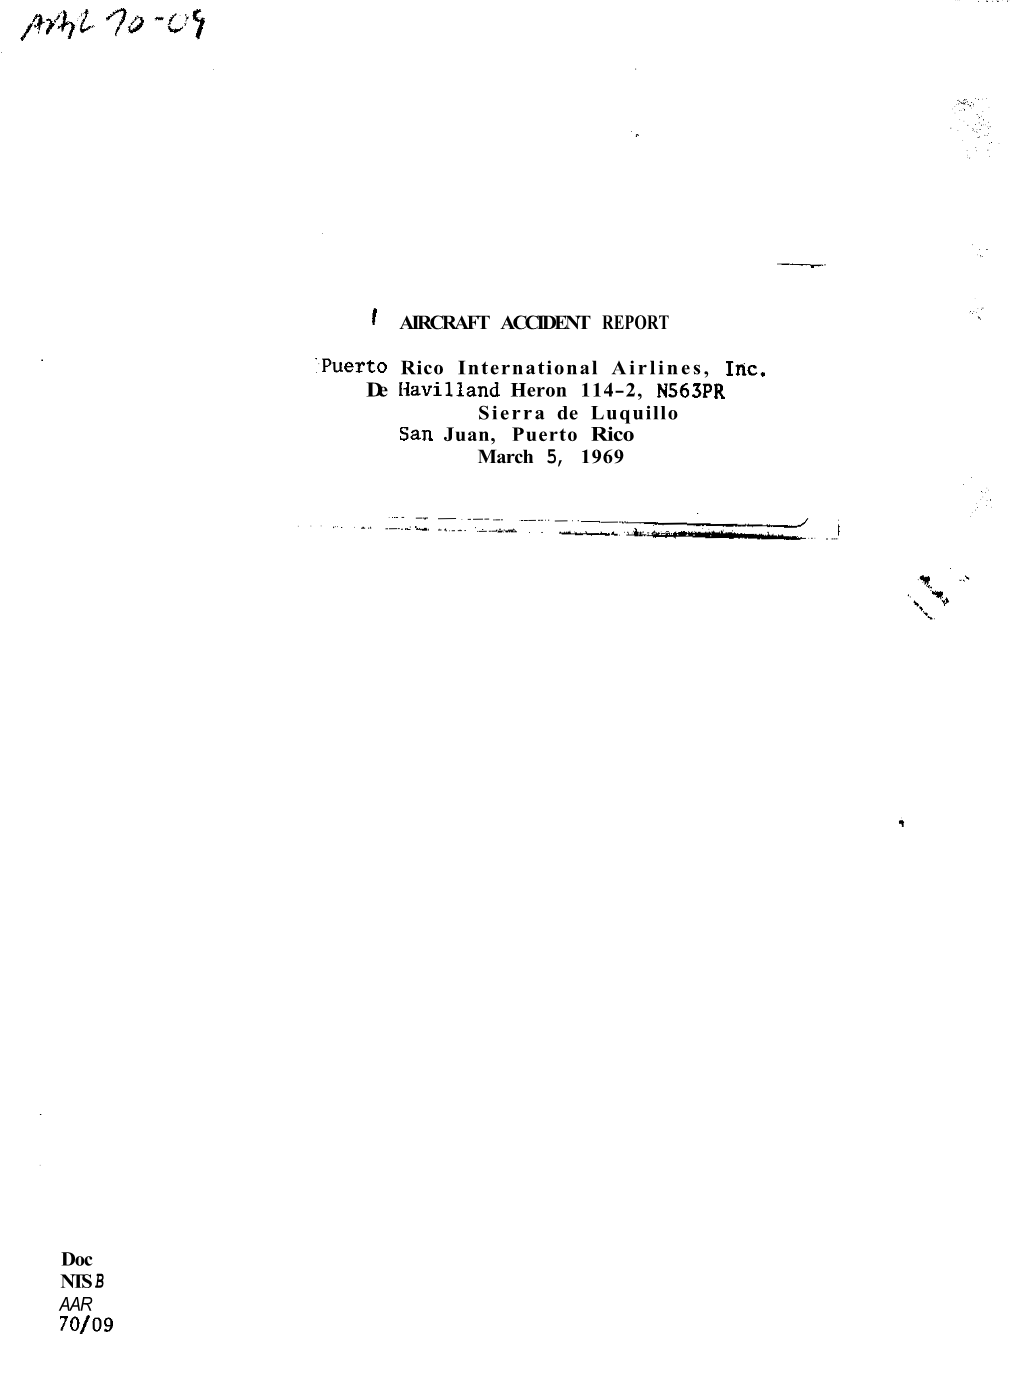 I AIRCRAFT ACCIDENT REPORT -Puerto Rico International Airlines